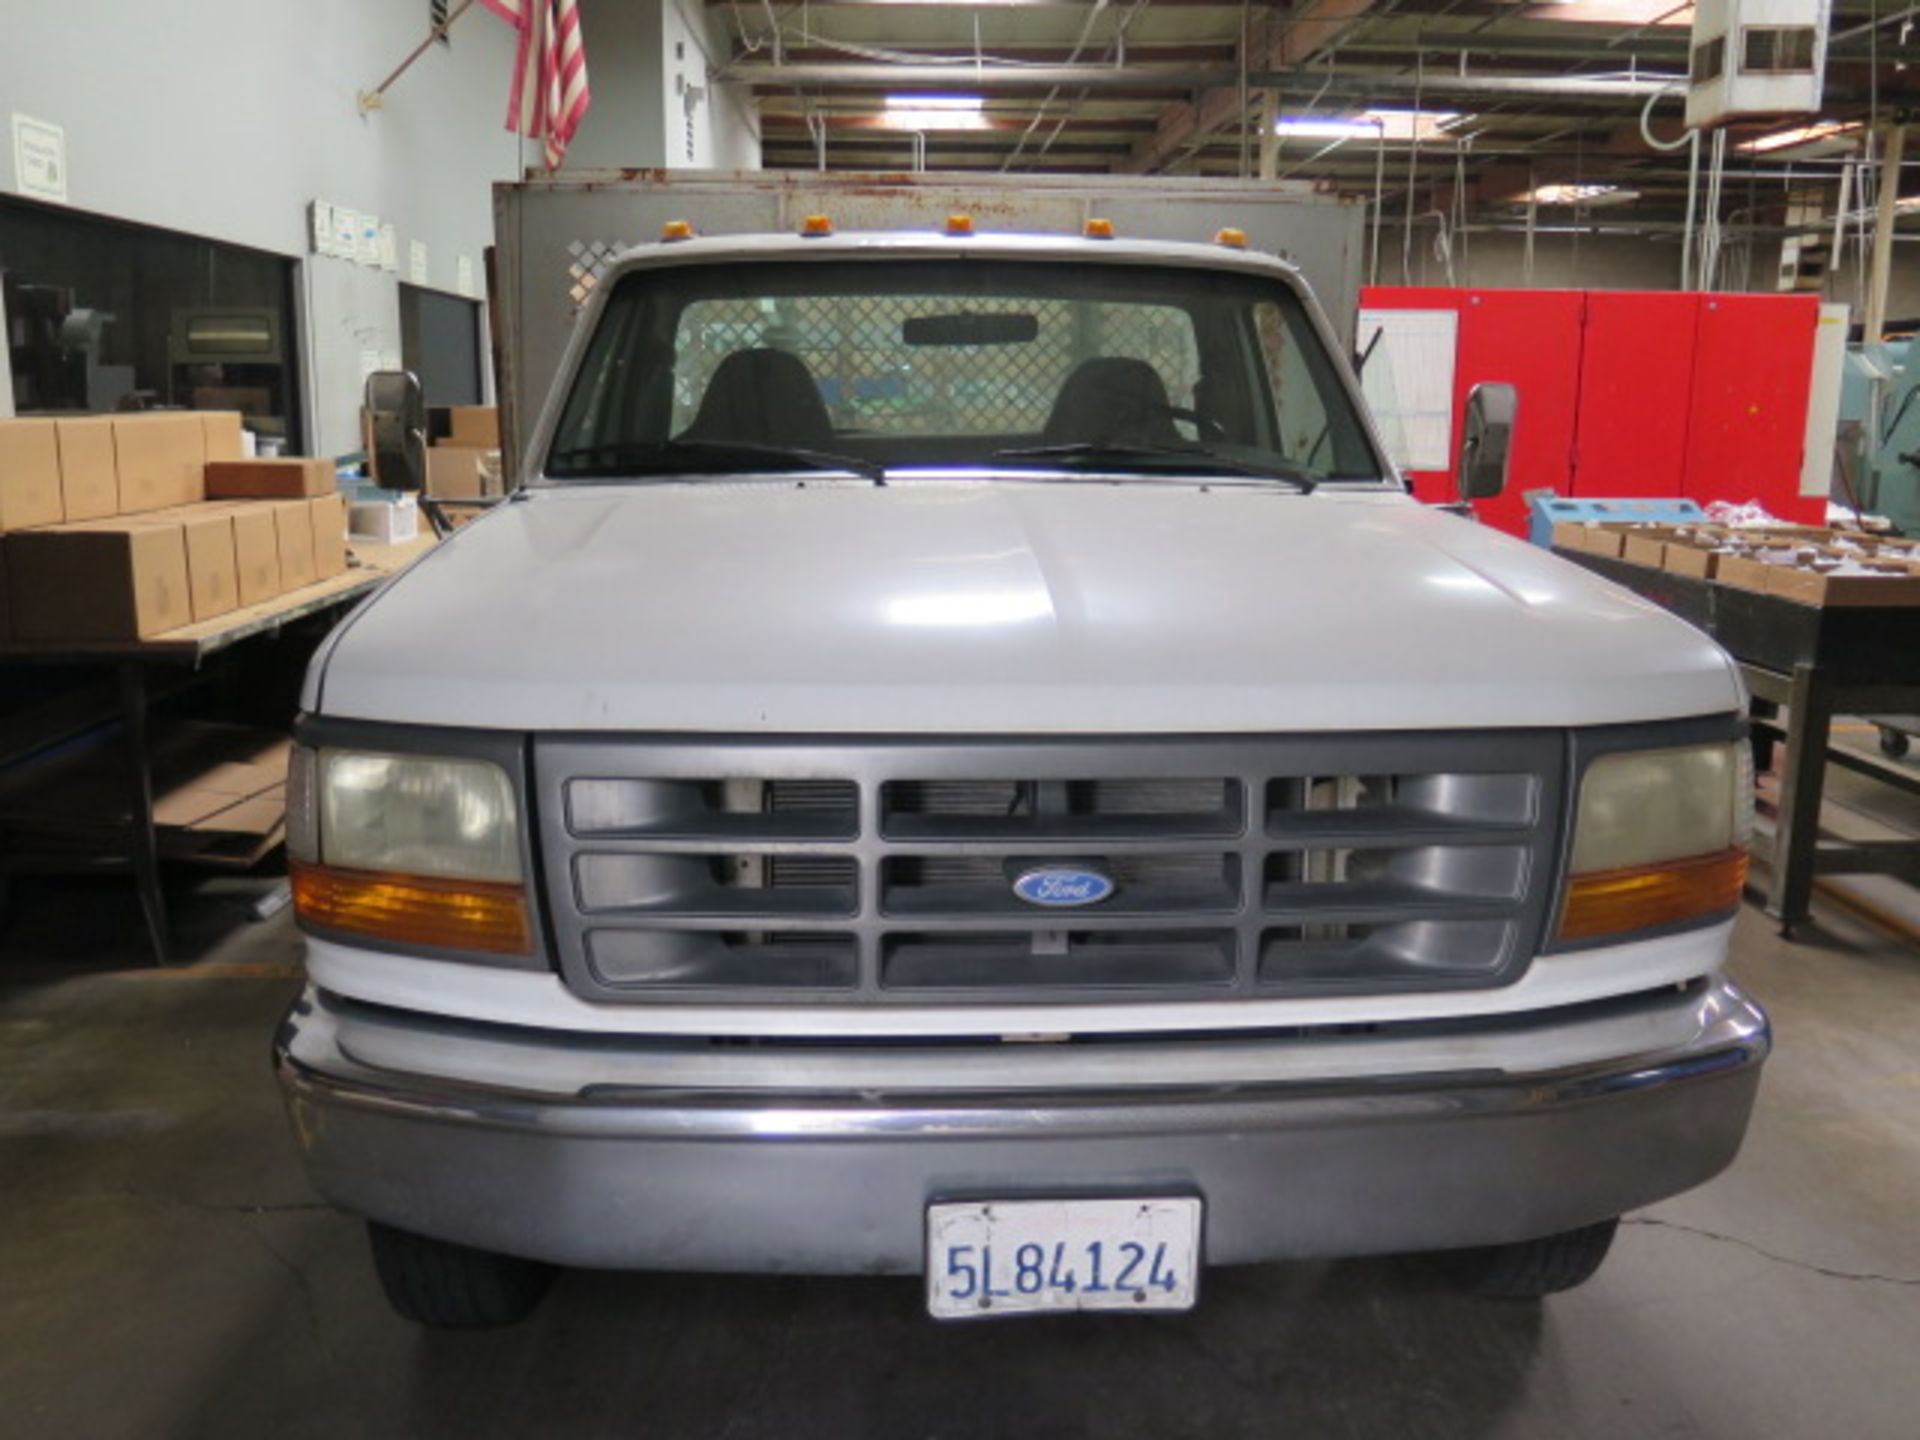 1997 Ford F-350 12’ Truck Lisc# 5L84124 w/ 7.5L V8 Gas, 5-Sp Manual Trans, 163,374 Miles, SOLD AS IS - Image 2 of 23